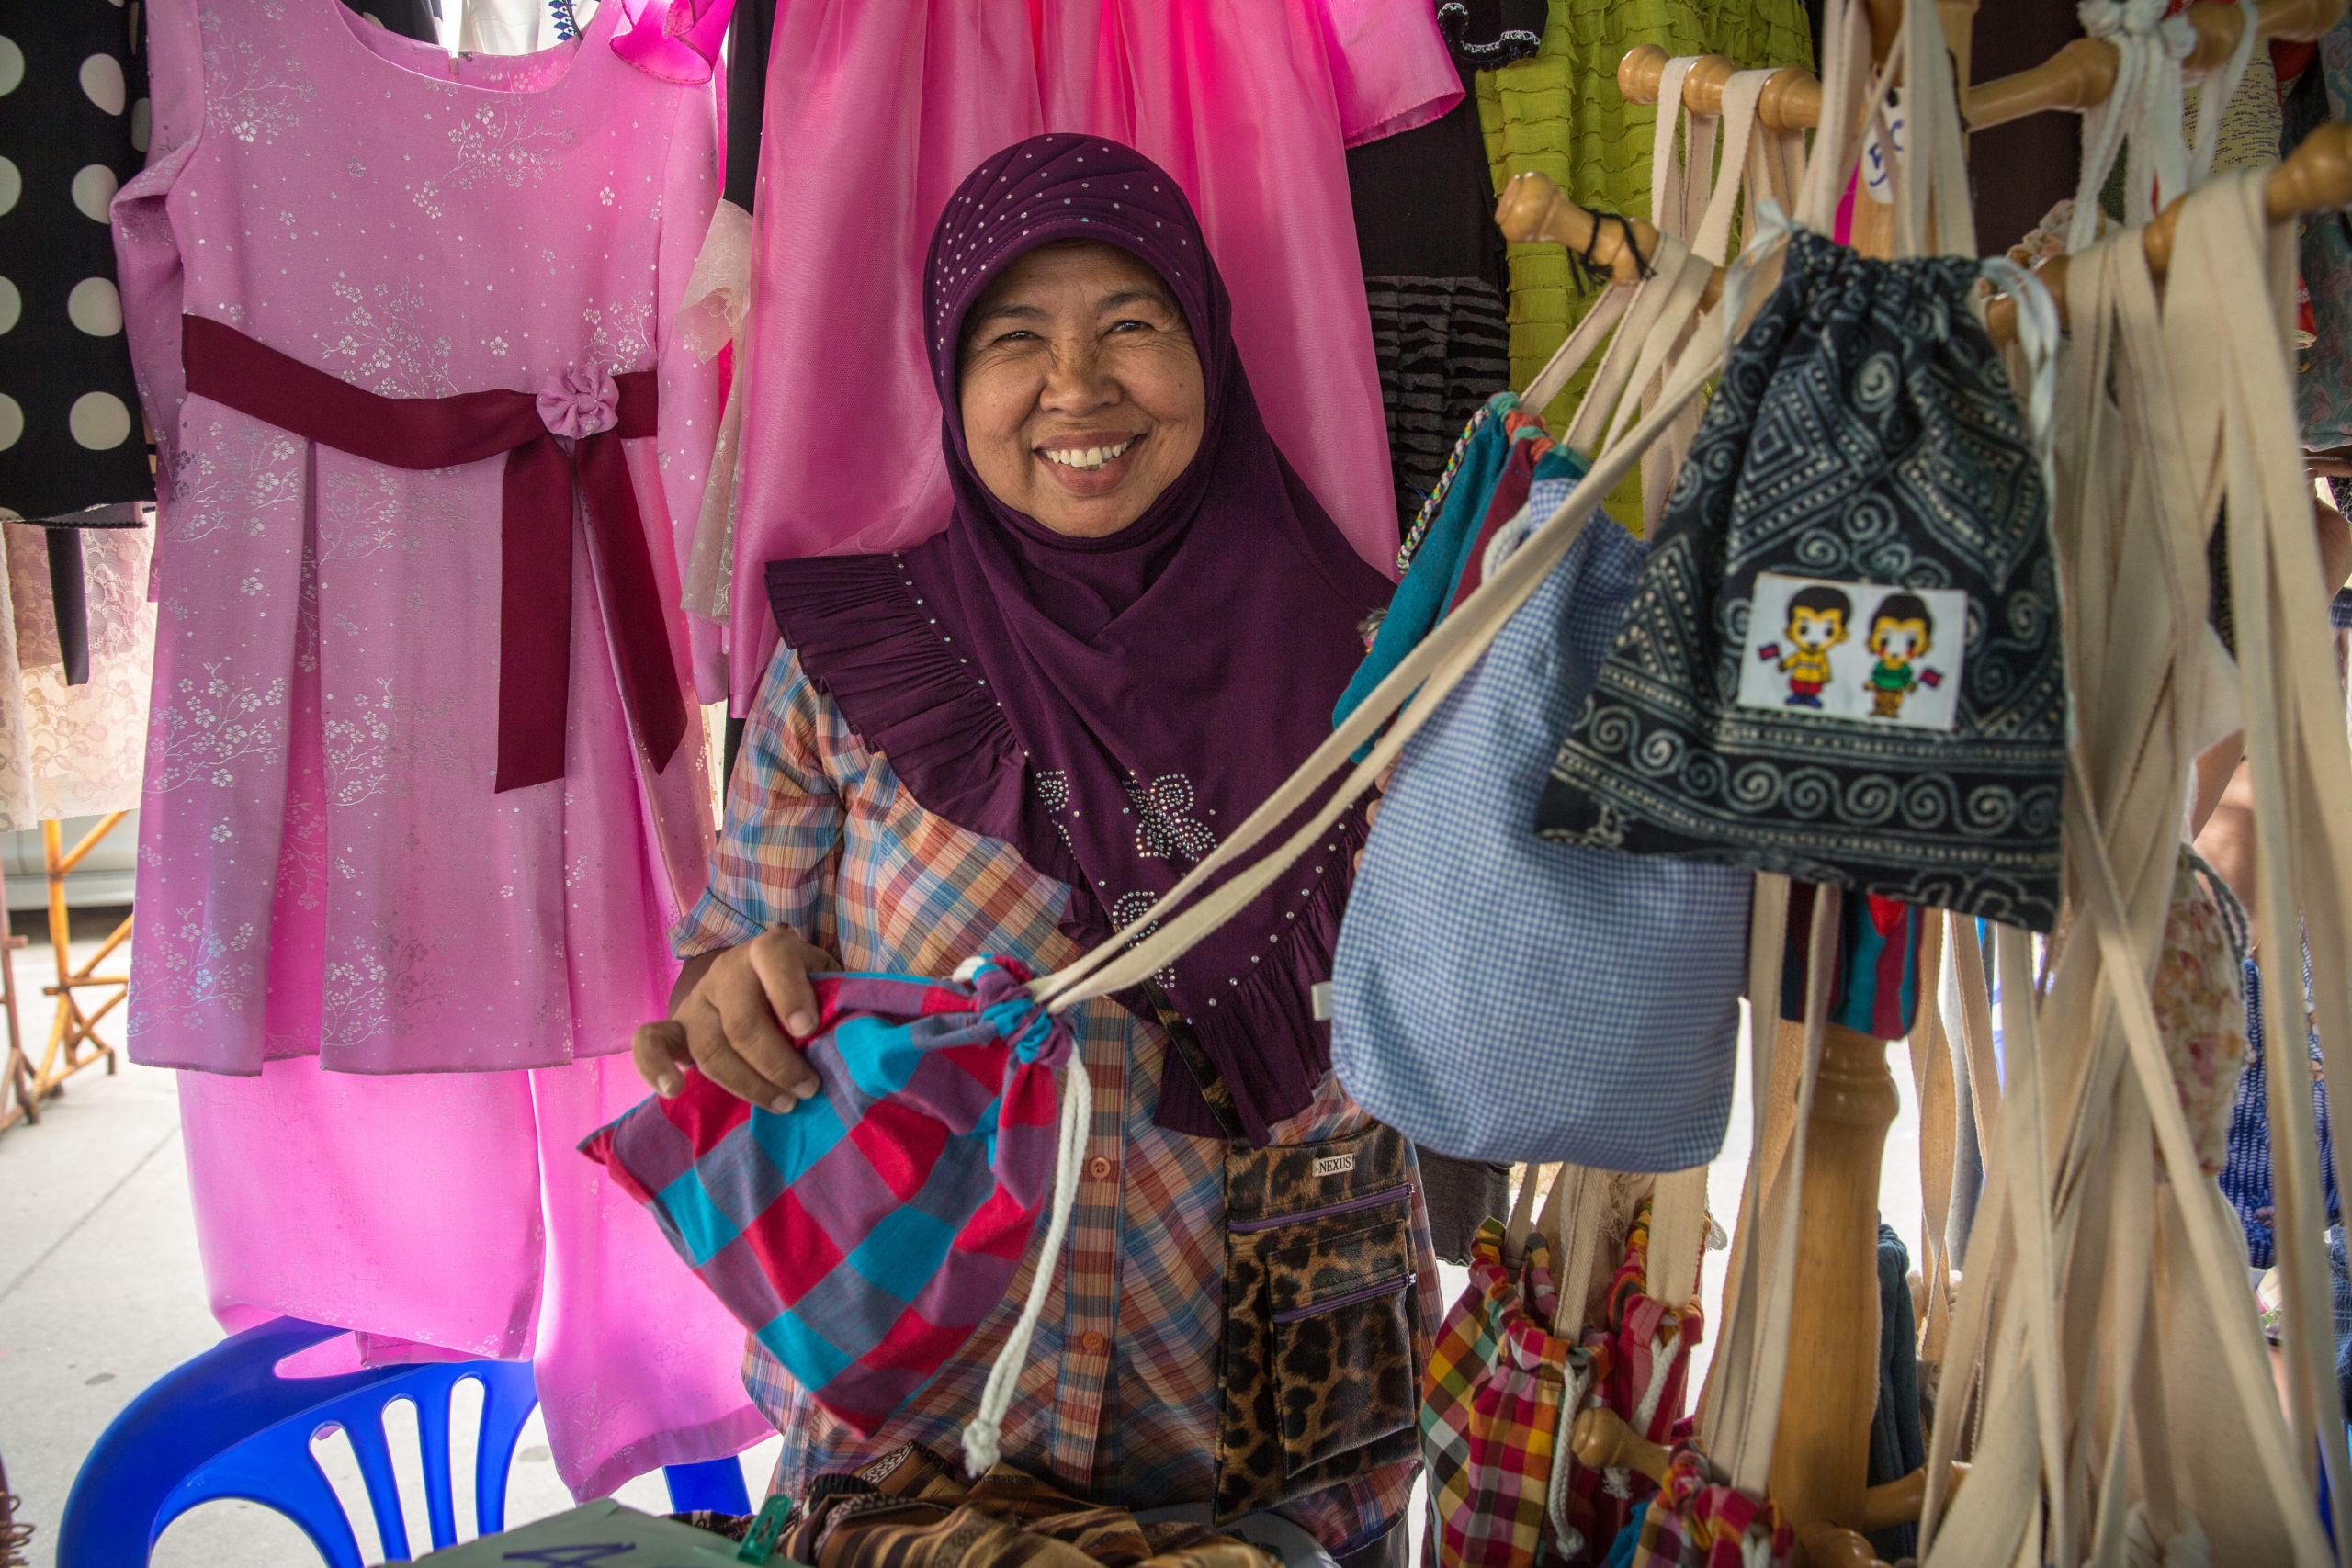 Aurapin Sakvichit shows off her clothing for sale at a local market in Thailand. It is no surprise that those women and girls hit hardest by the pandemic are those who have always had the most restricted access to reproductive health supplies. Photo: Paula Bronstein/Getty Images/Images of Empowerment